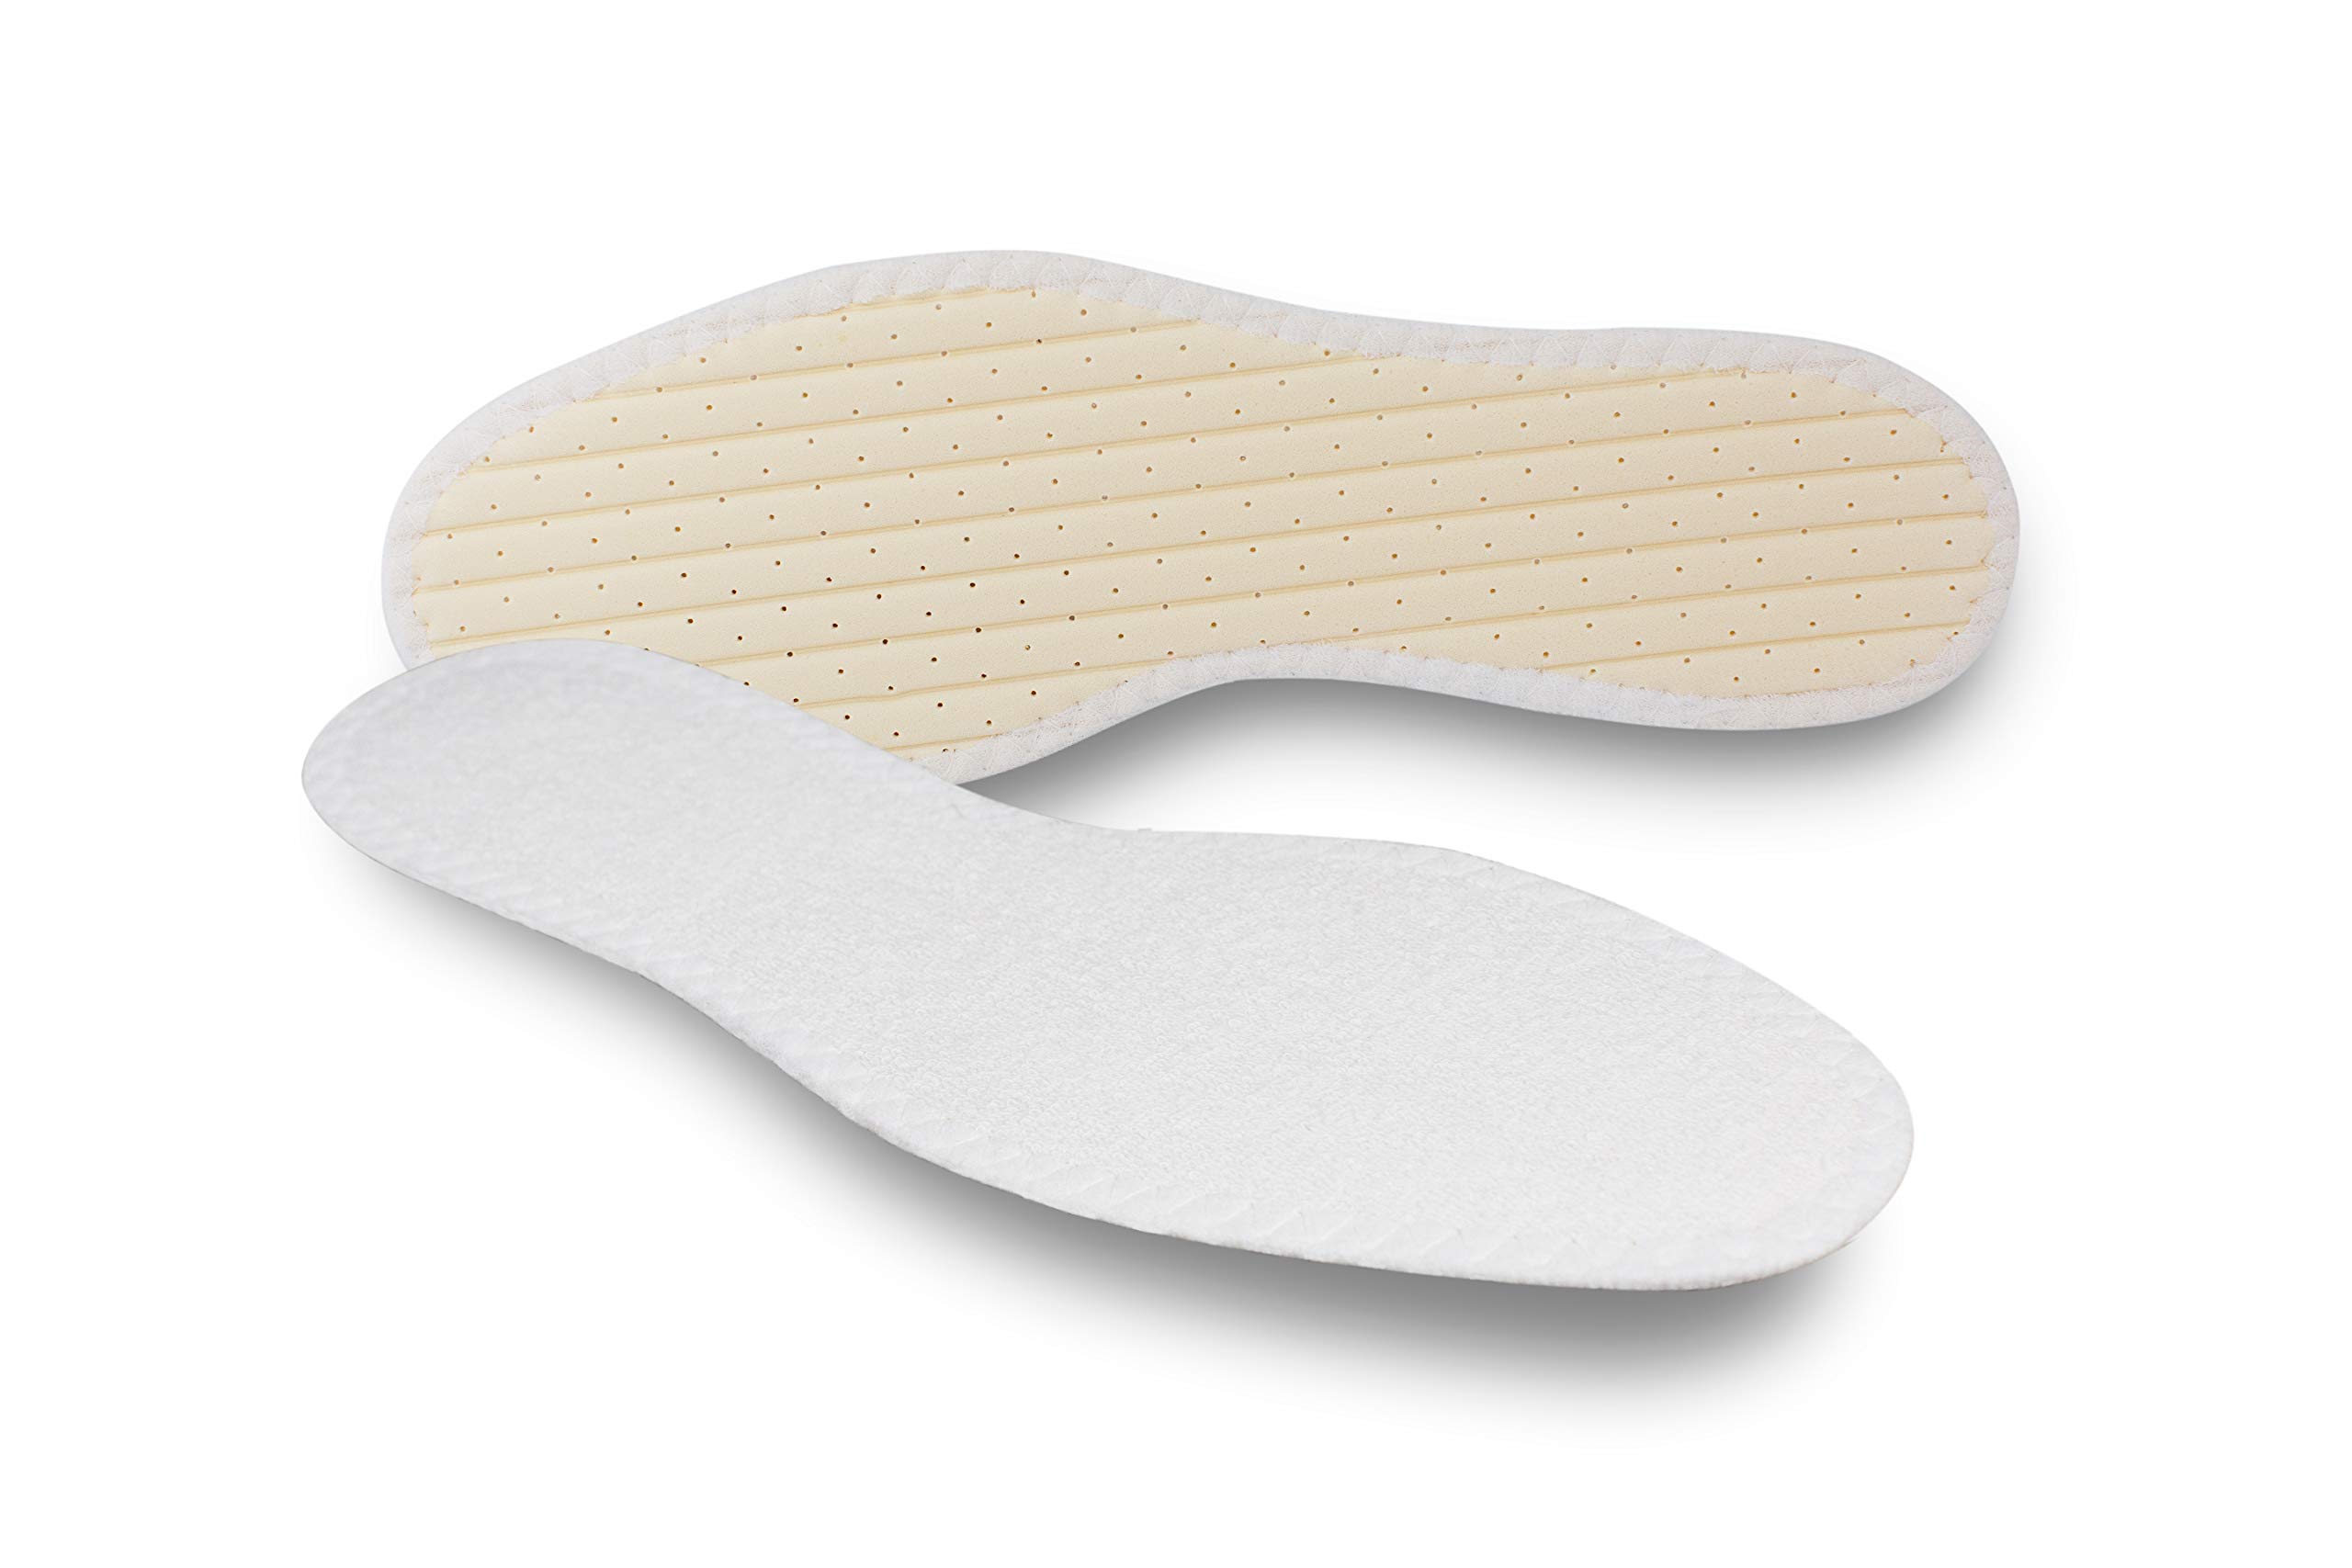 Pedag Summer | Terry Cotton Sockless Insoles | Barefoot Inserts | Handmade in Germany | Absorbs Sweat & Controls Odor | Wear Without Socks | Washable | US Women 7/ EU 37 | White | 1 Pair